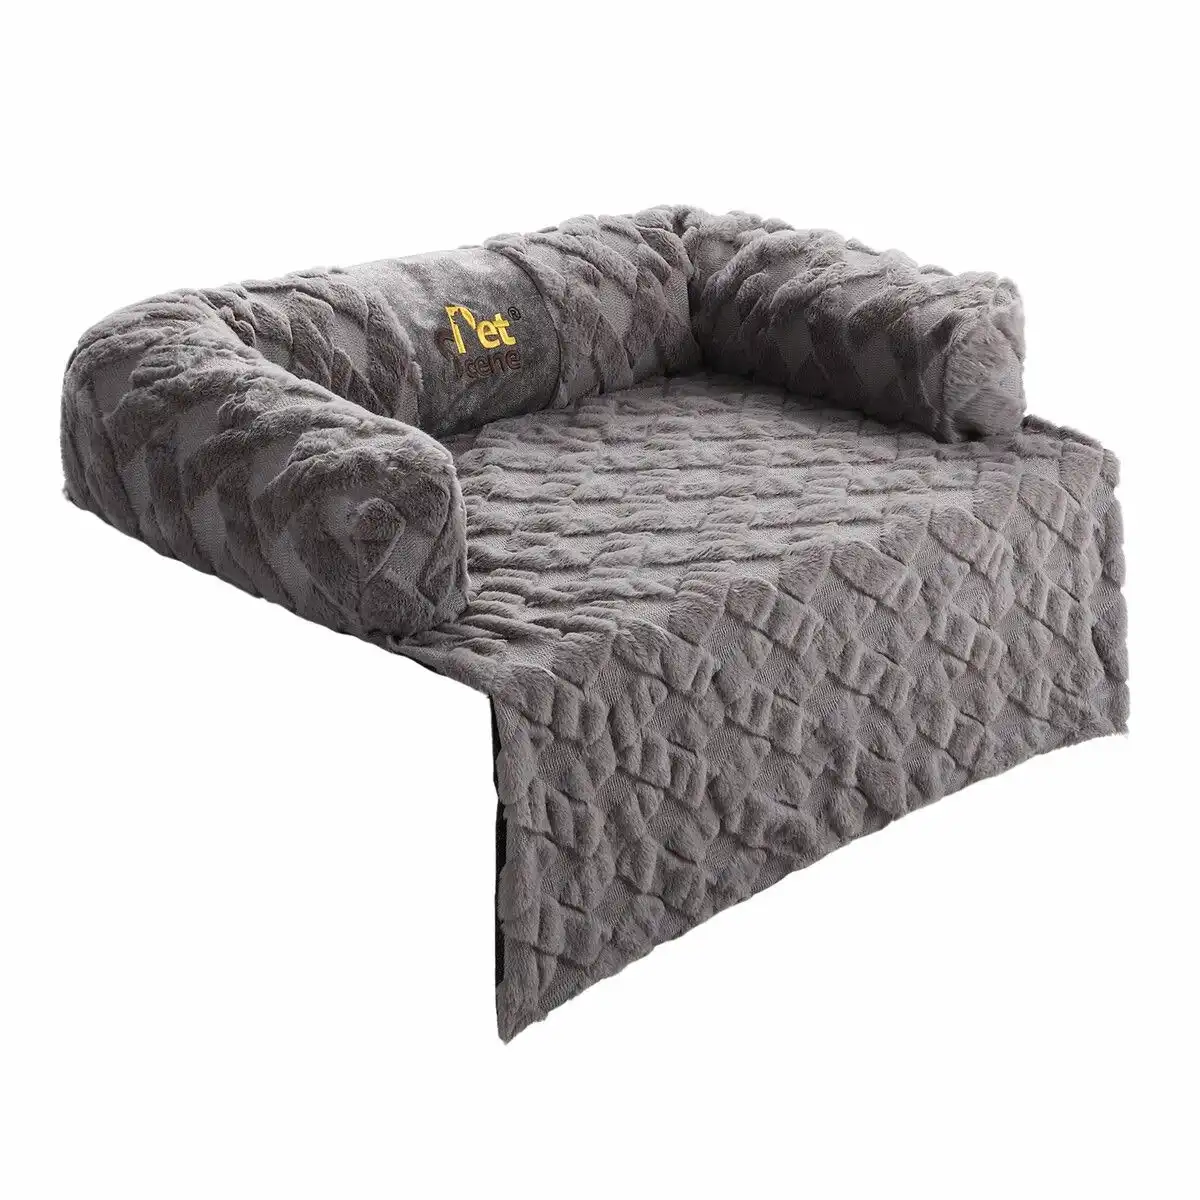 Ausway Dog Cat Bed XL Sofa Calming Luxury Puppy Couch Car Cushion Mat Cover Protector Warm Soft Fluffy Bolster Kitten Nest Washable Grey